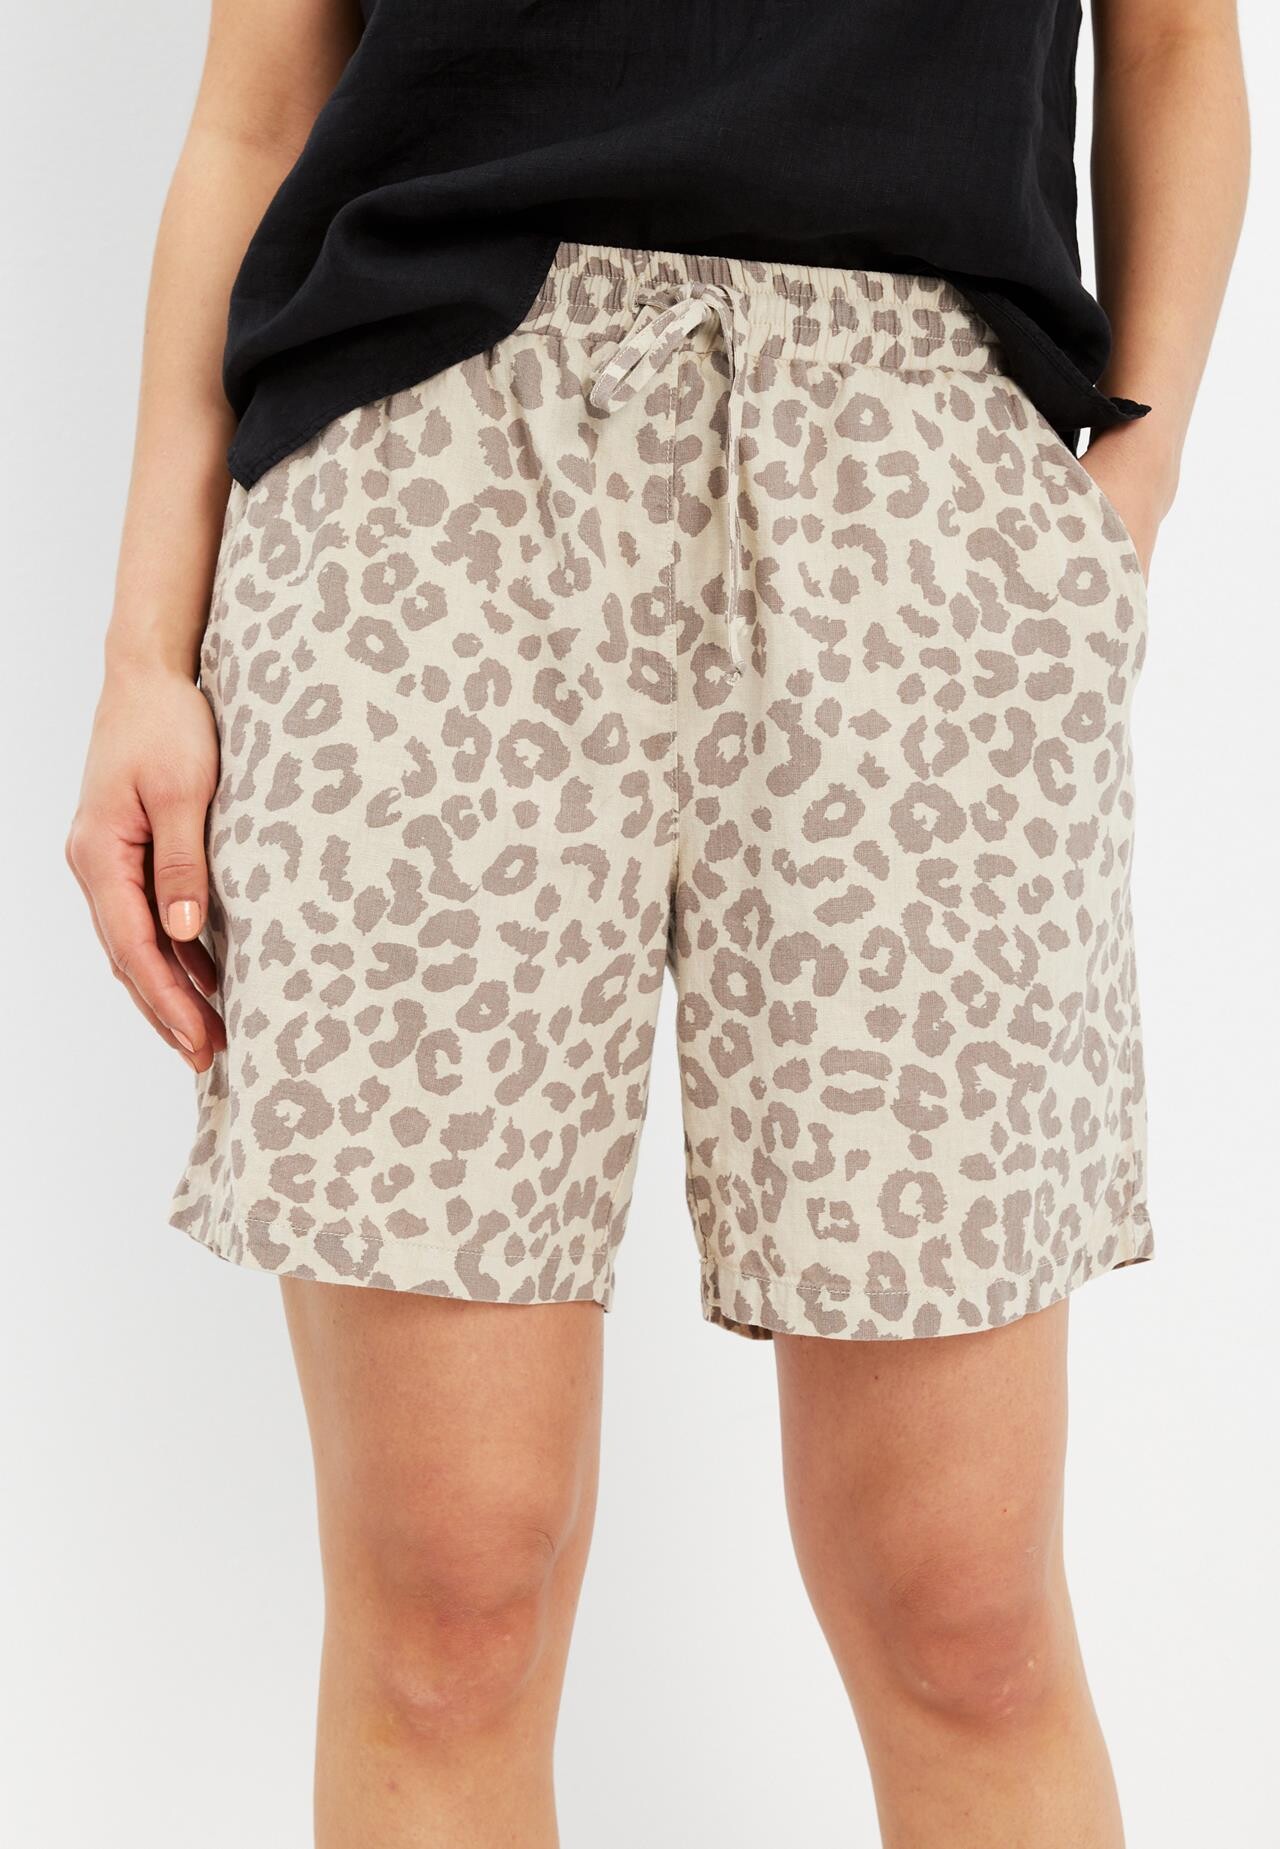 IN FRONT LINA LEO SHORTS 15694 190 (Nature 190, S)